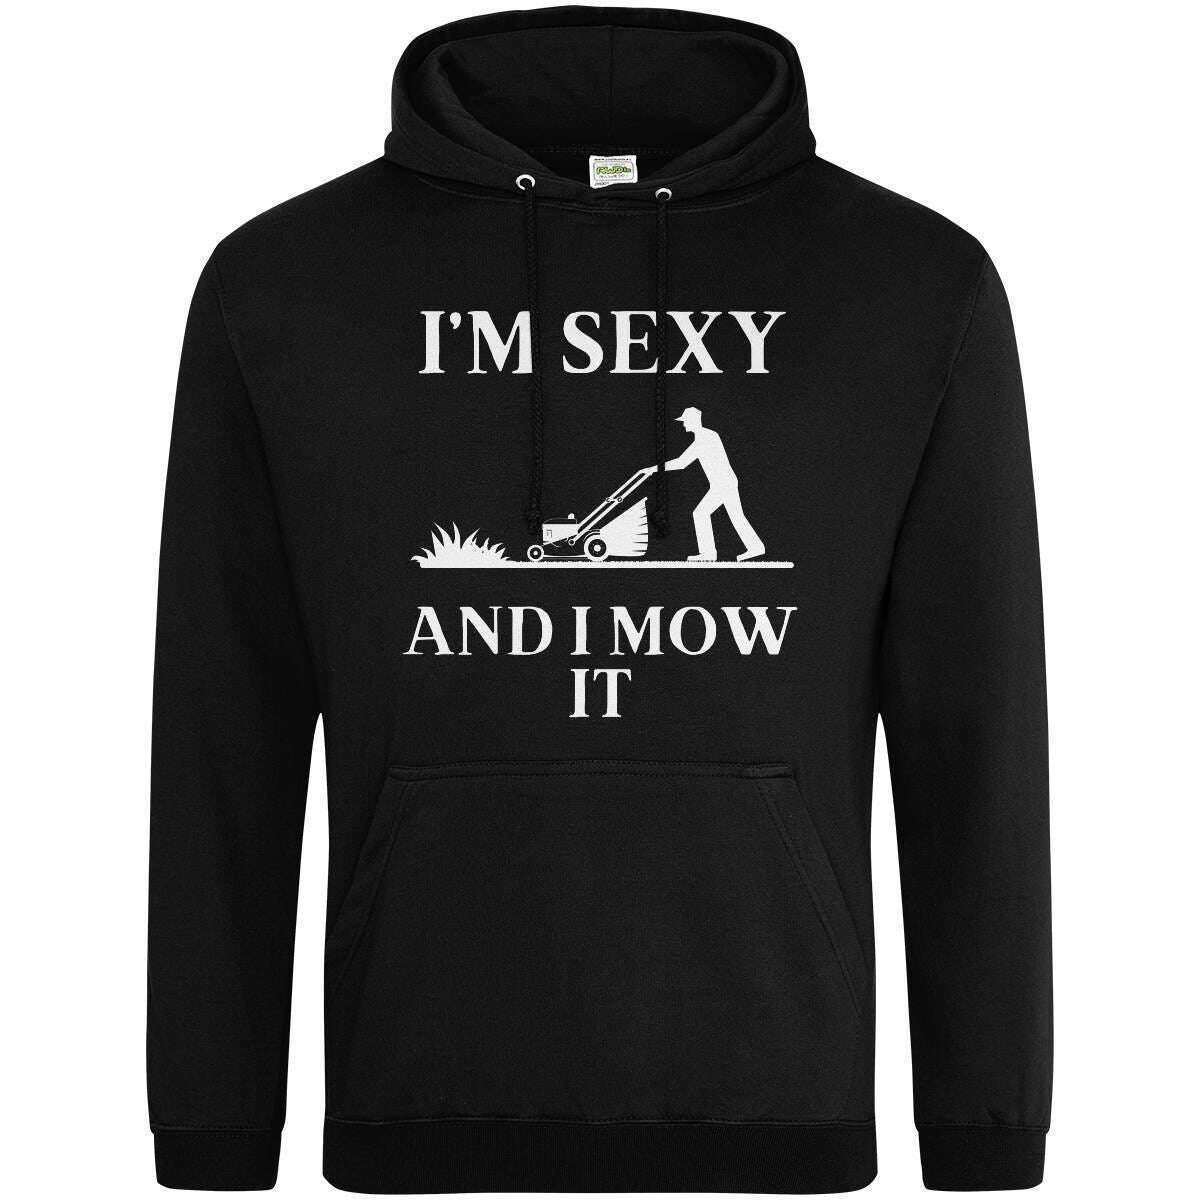 Teemarkable! I’m Sexy and I Mow It Hoodie